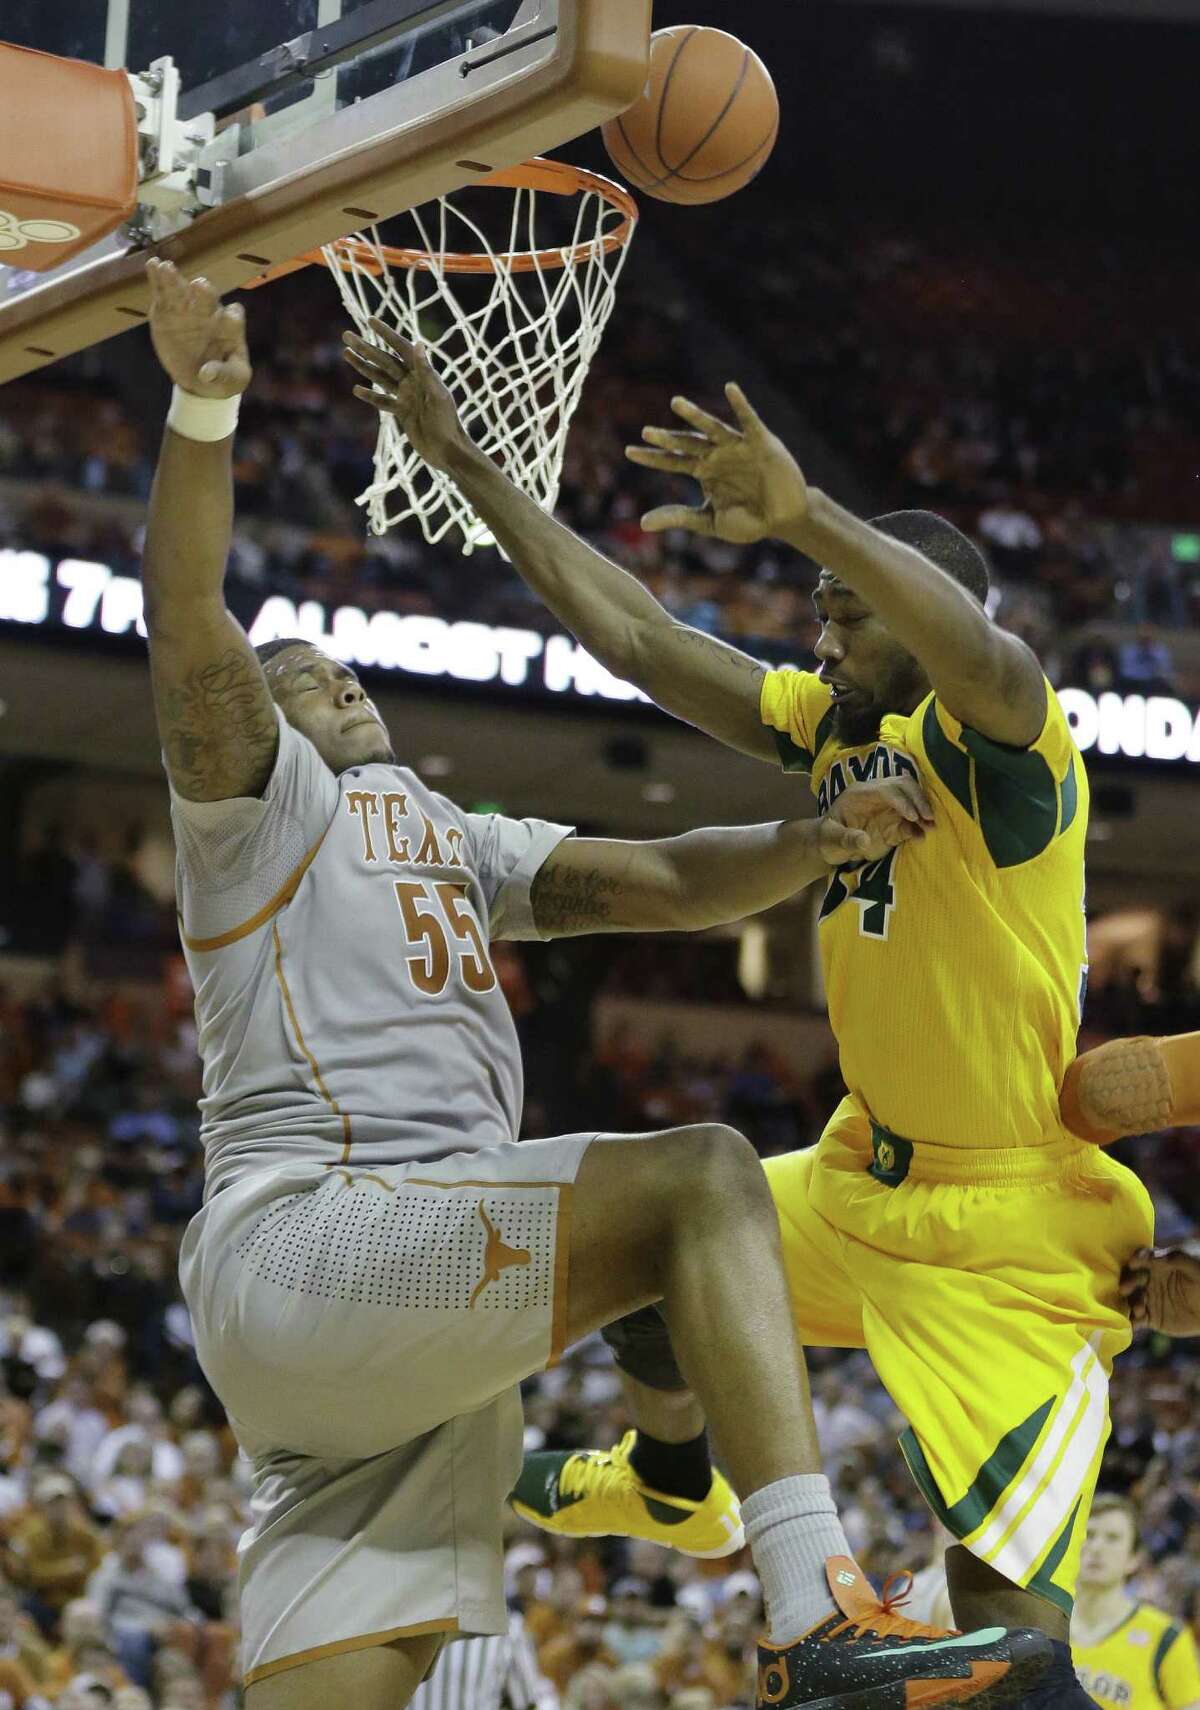 Texas' Cameron Ridley (55) blocks Baylor's Cory Jefferson (34) during the second half of an NCAA college basketball game, Wednesday, Feb. 26, 2014, in Austin, Texas. Texas won 74-69. (AP Photo/Eric Gay)